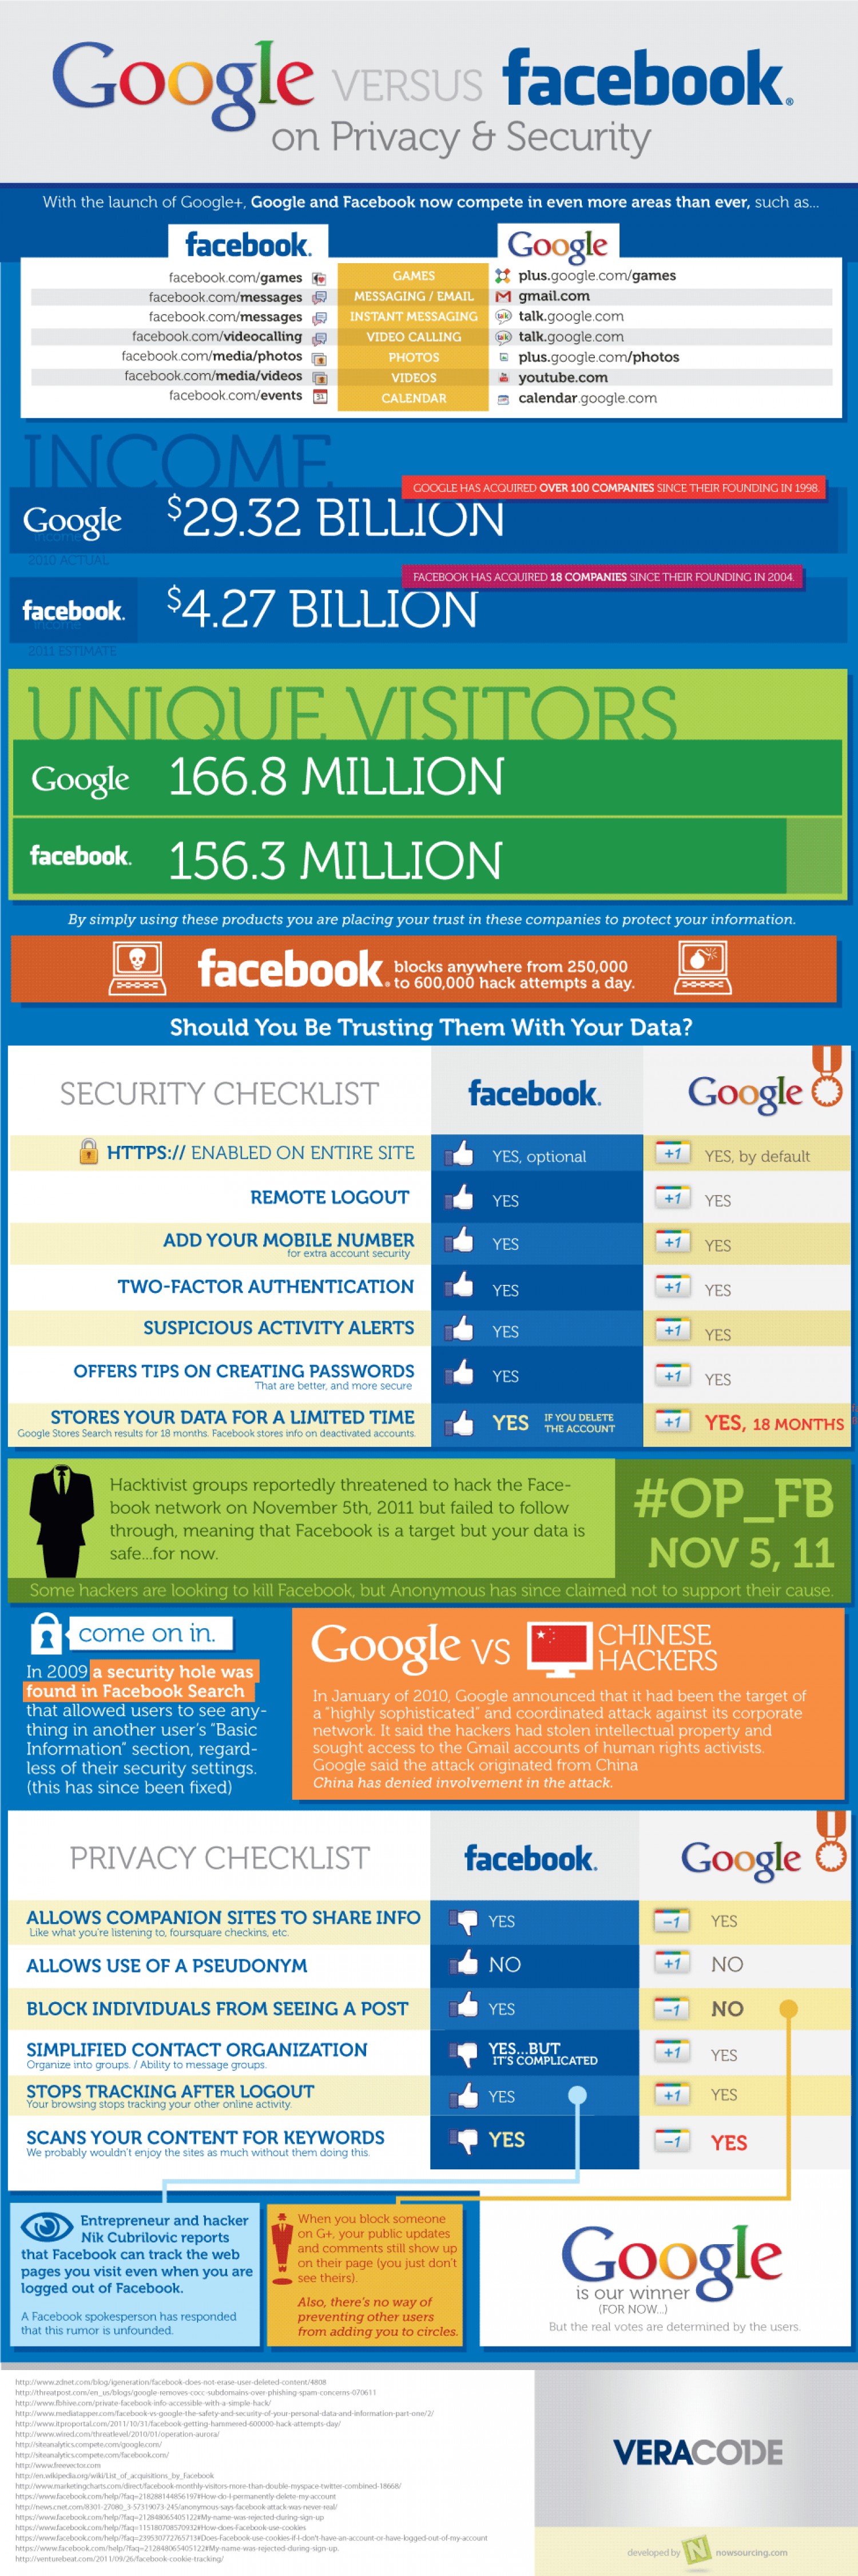 Google vs. Facebook on privacy & security